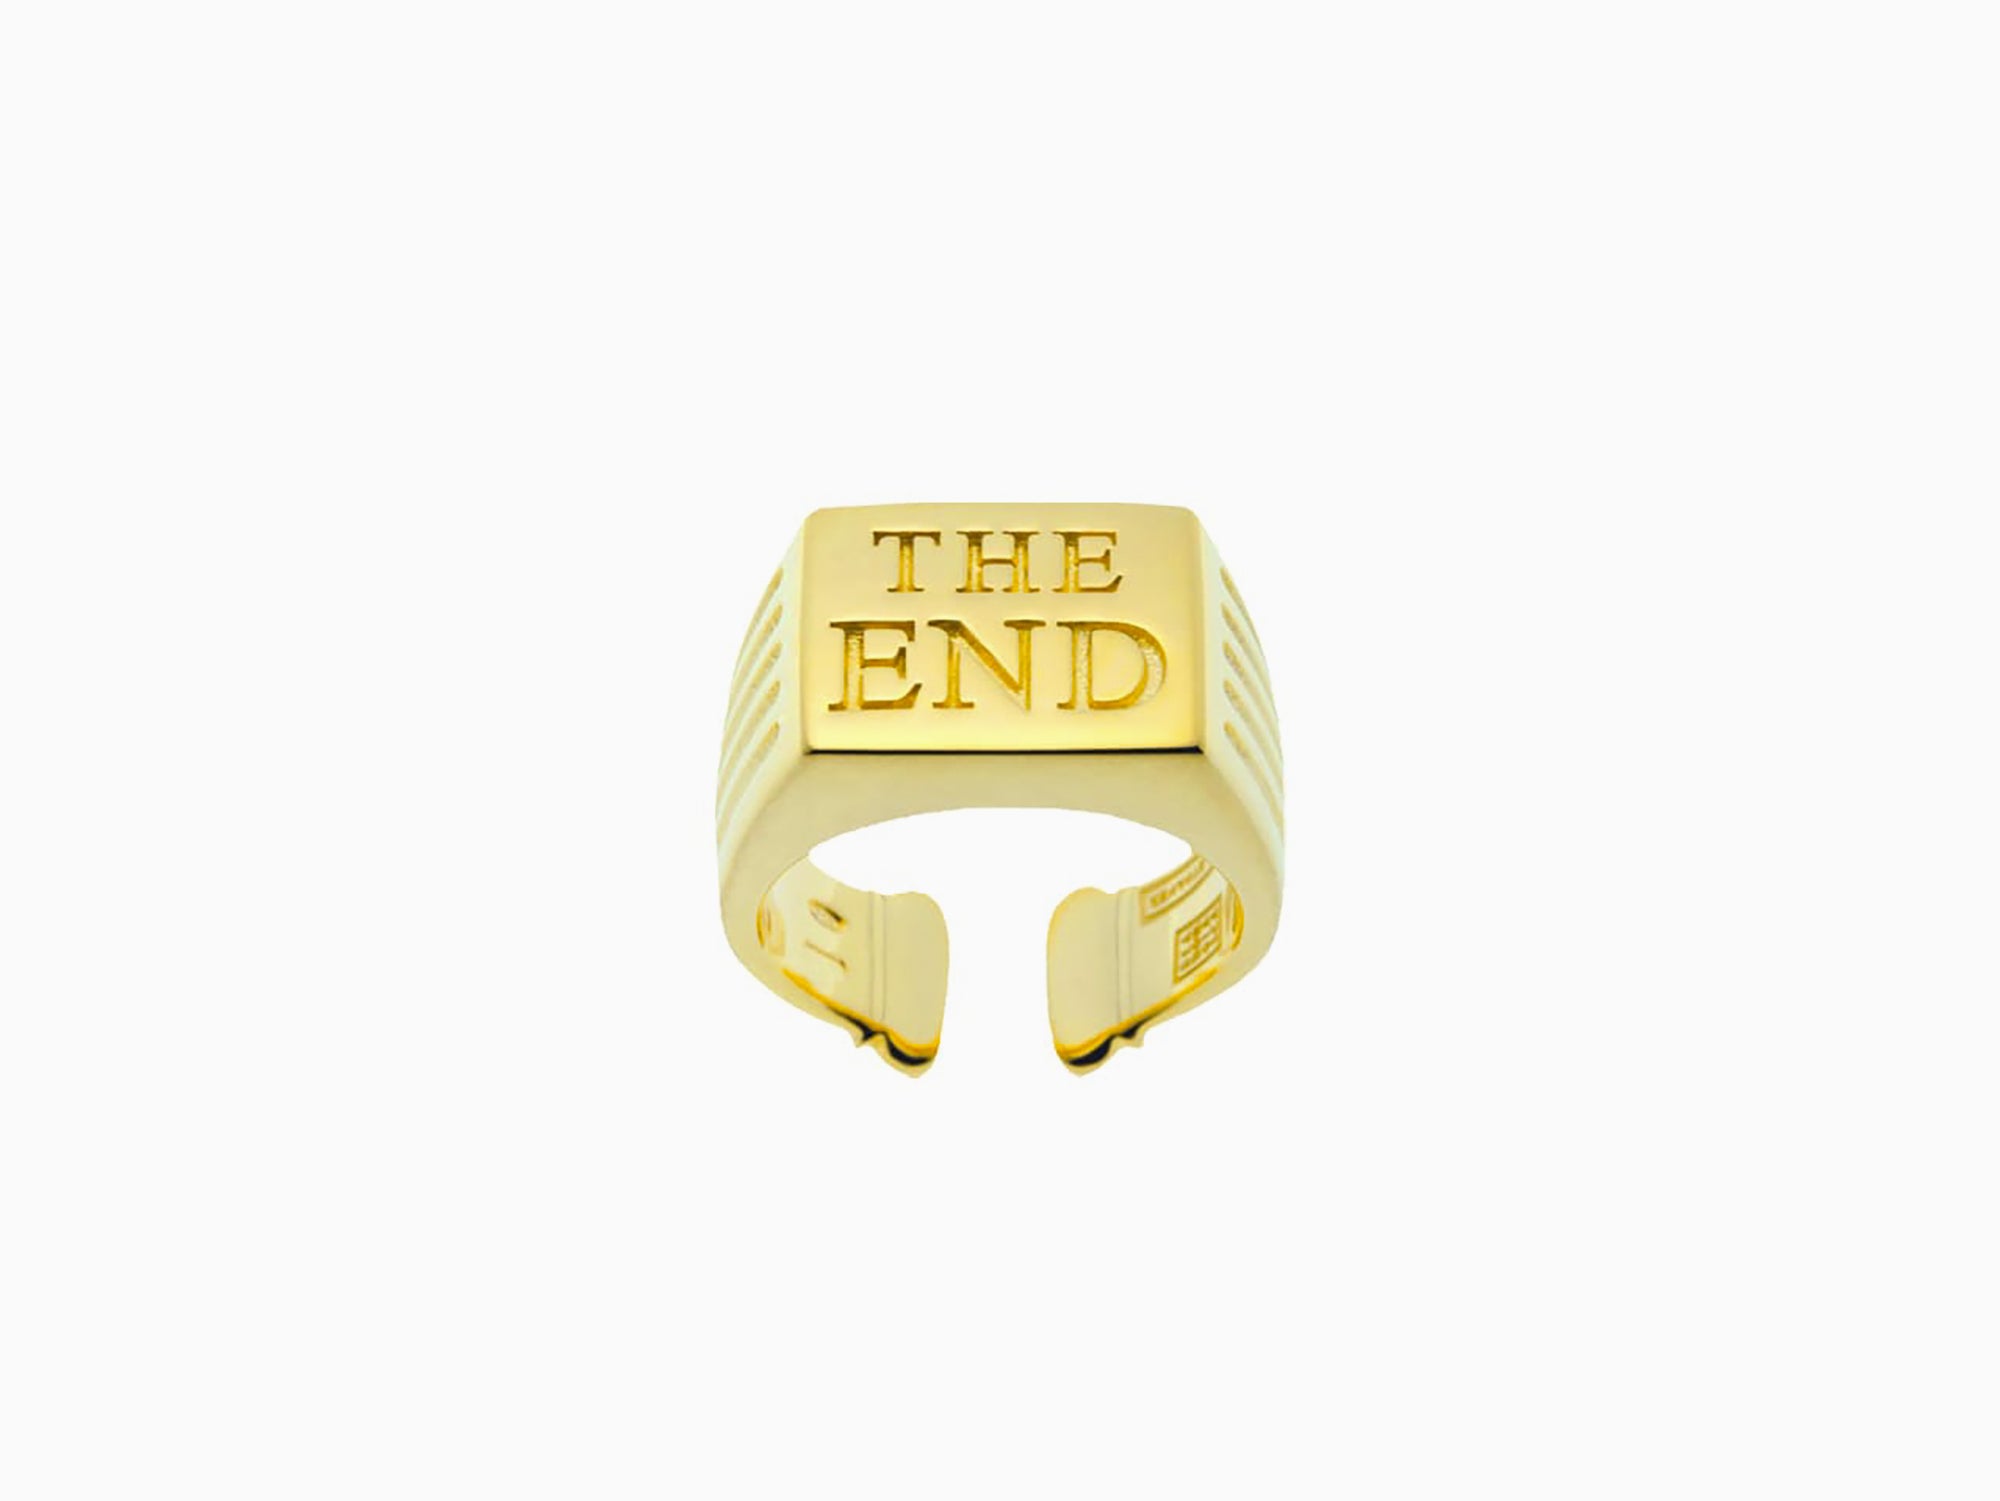 Toiletpaper - "The End" ring - gold